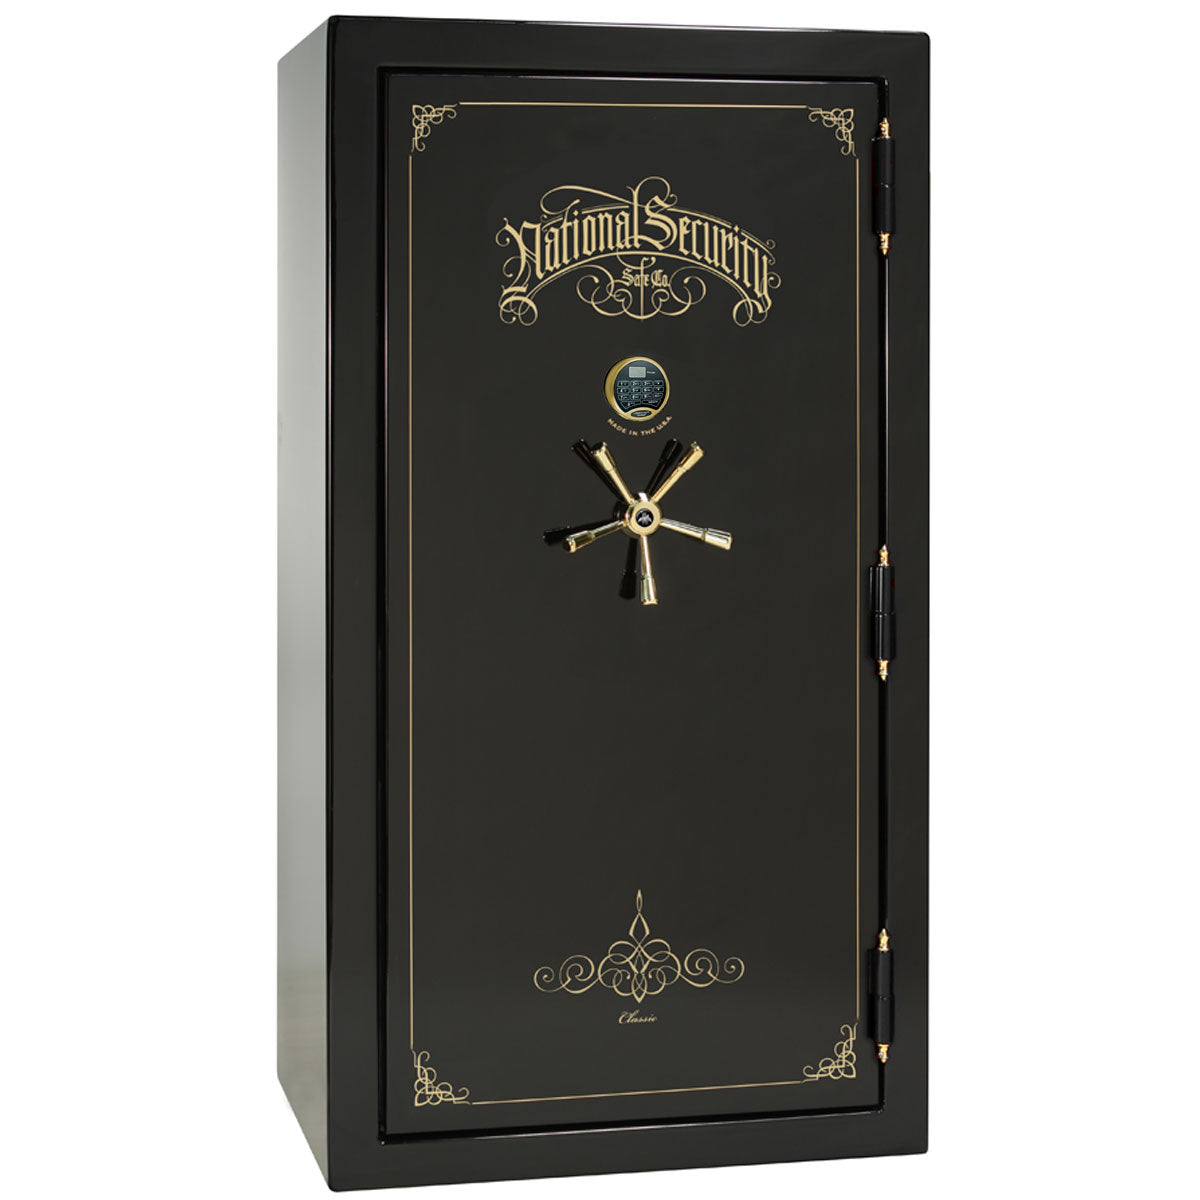 Liberty Safe Classic Plus 40 in Black Gloss with Brass Electronic Lock, closed door.